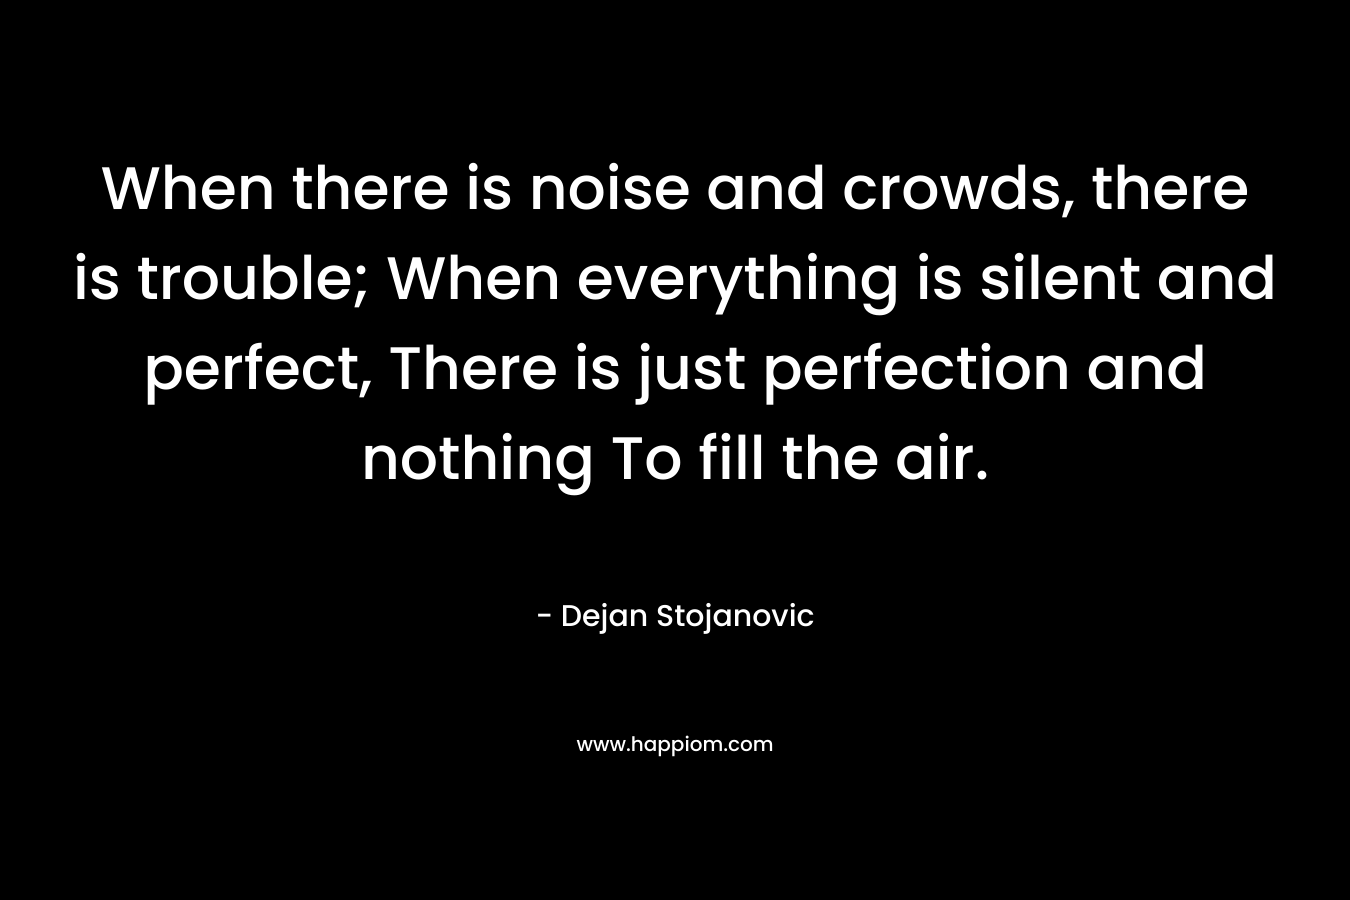 When there is noise and crowds, there is trouble; When everything is silent and perfect, There is just perfection and nothing To fill the air.